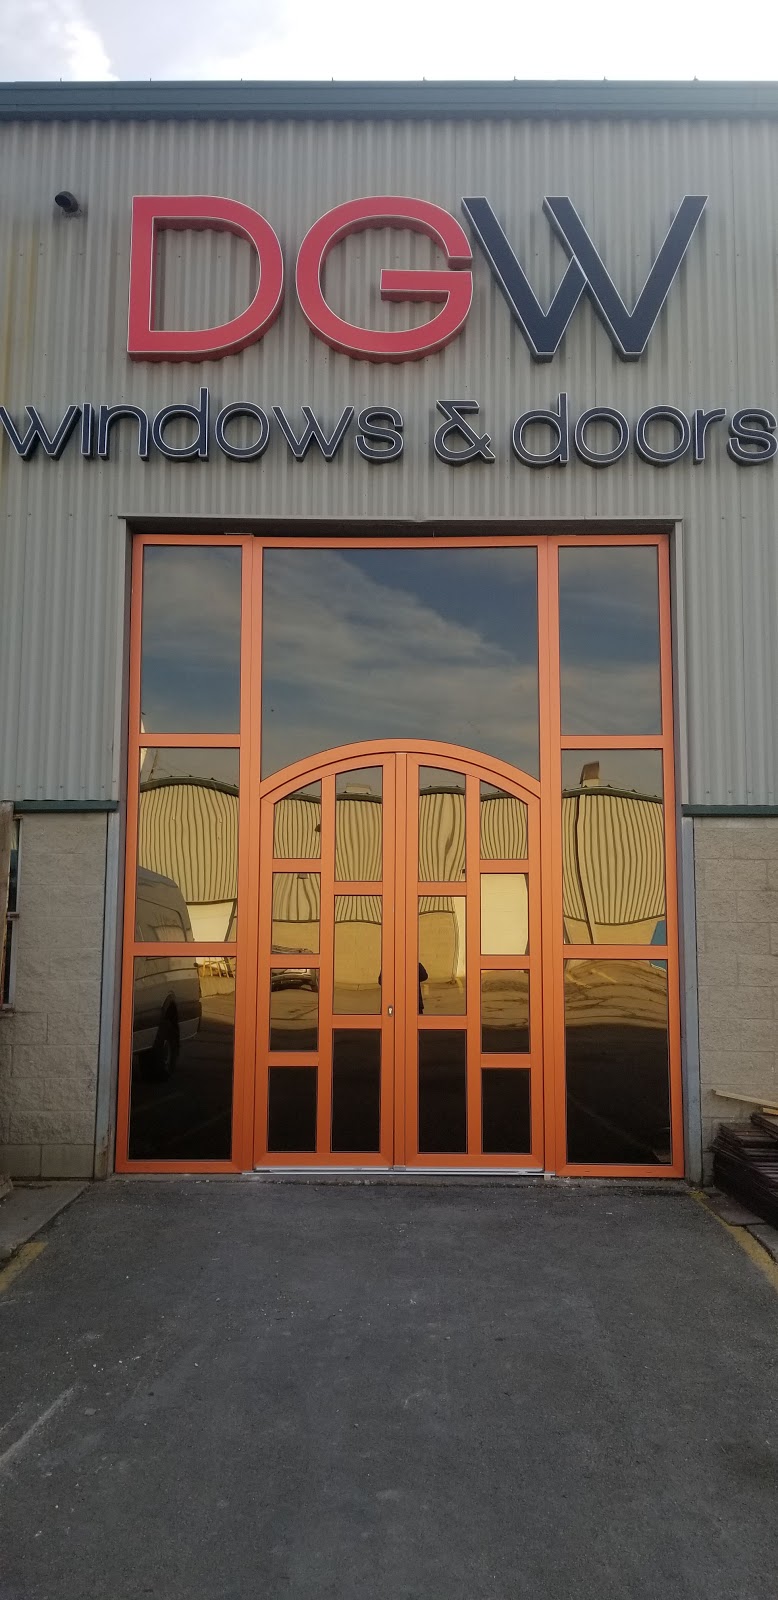 DGW windows and doors | point of interest | 791 S Service Rd #2-3, Stoney Creek, ON L8E 5Z2, Canada | 9058021678 OR +1 905-802-1678